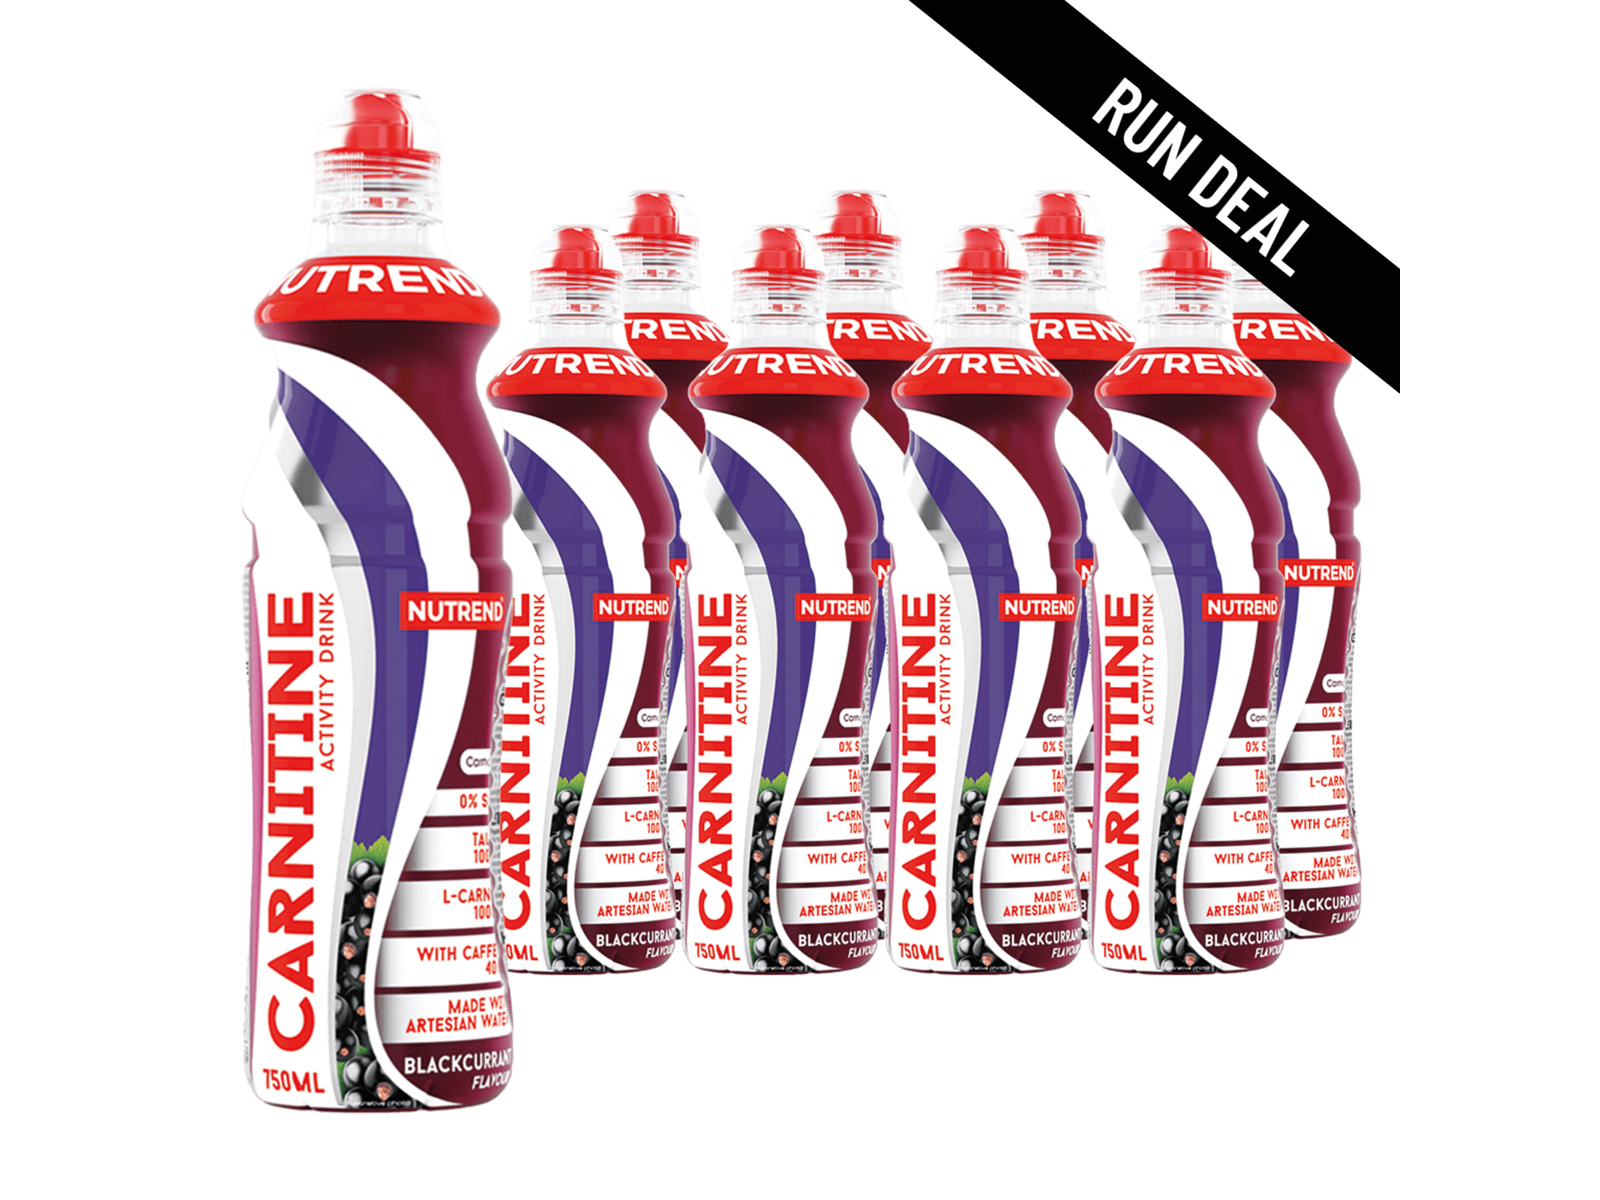 Nutrend - Carnitine Activity Drink (8-pack) (Blackcurrant - 8 x 750 ml)